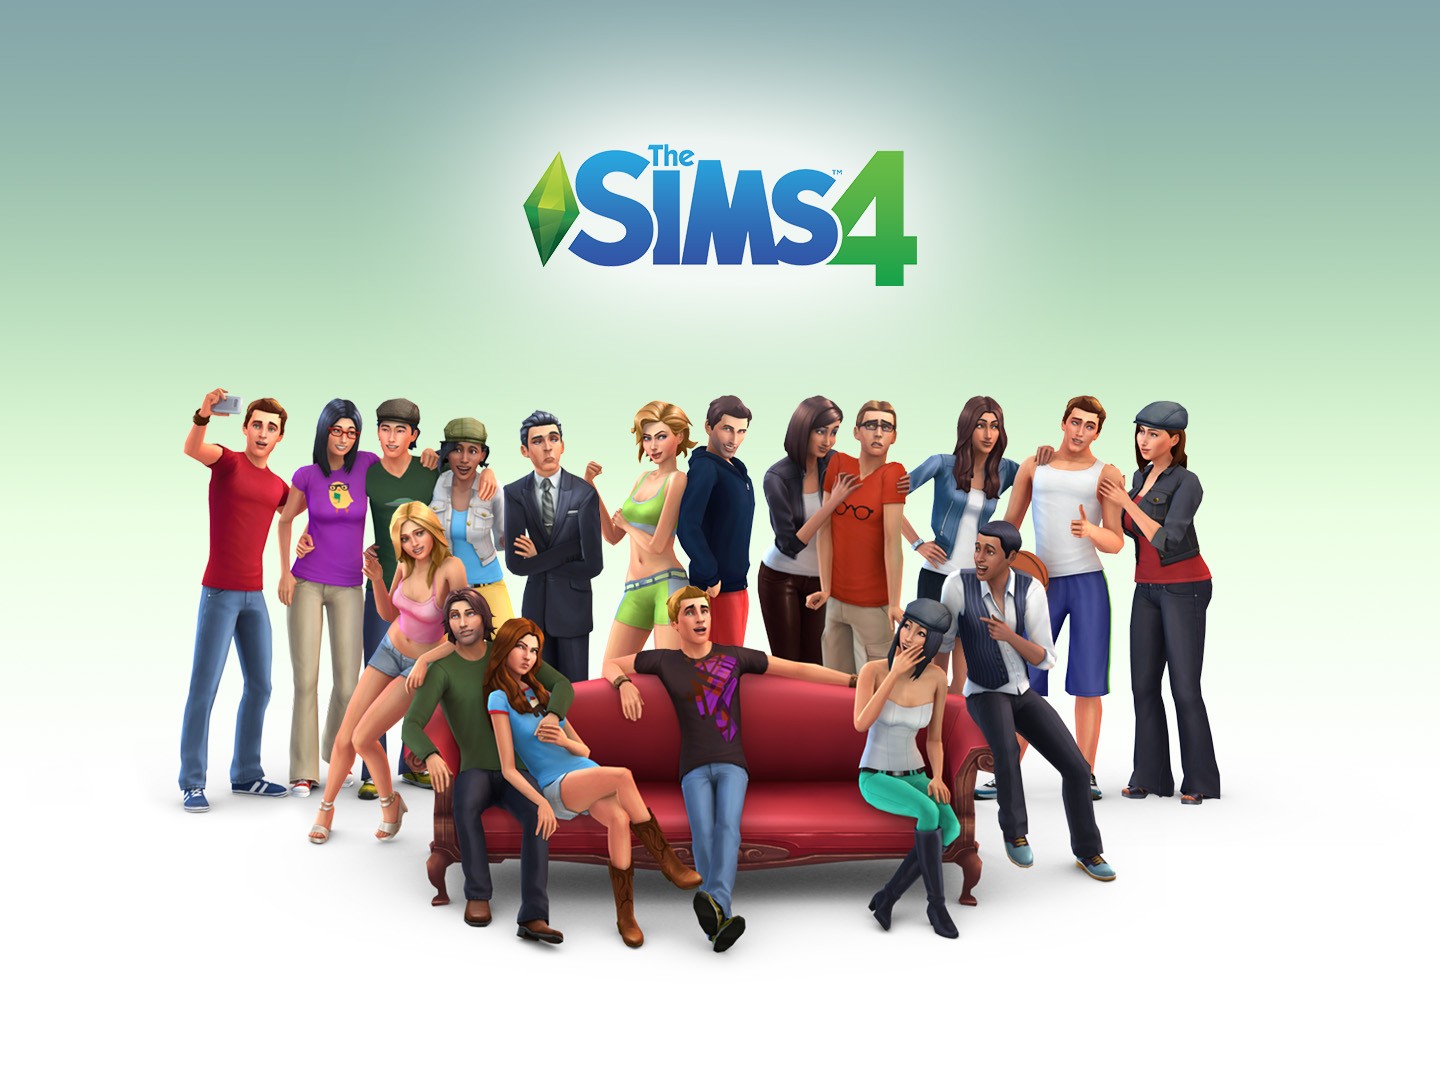 the sims 4 full download windows 10 free